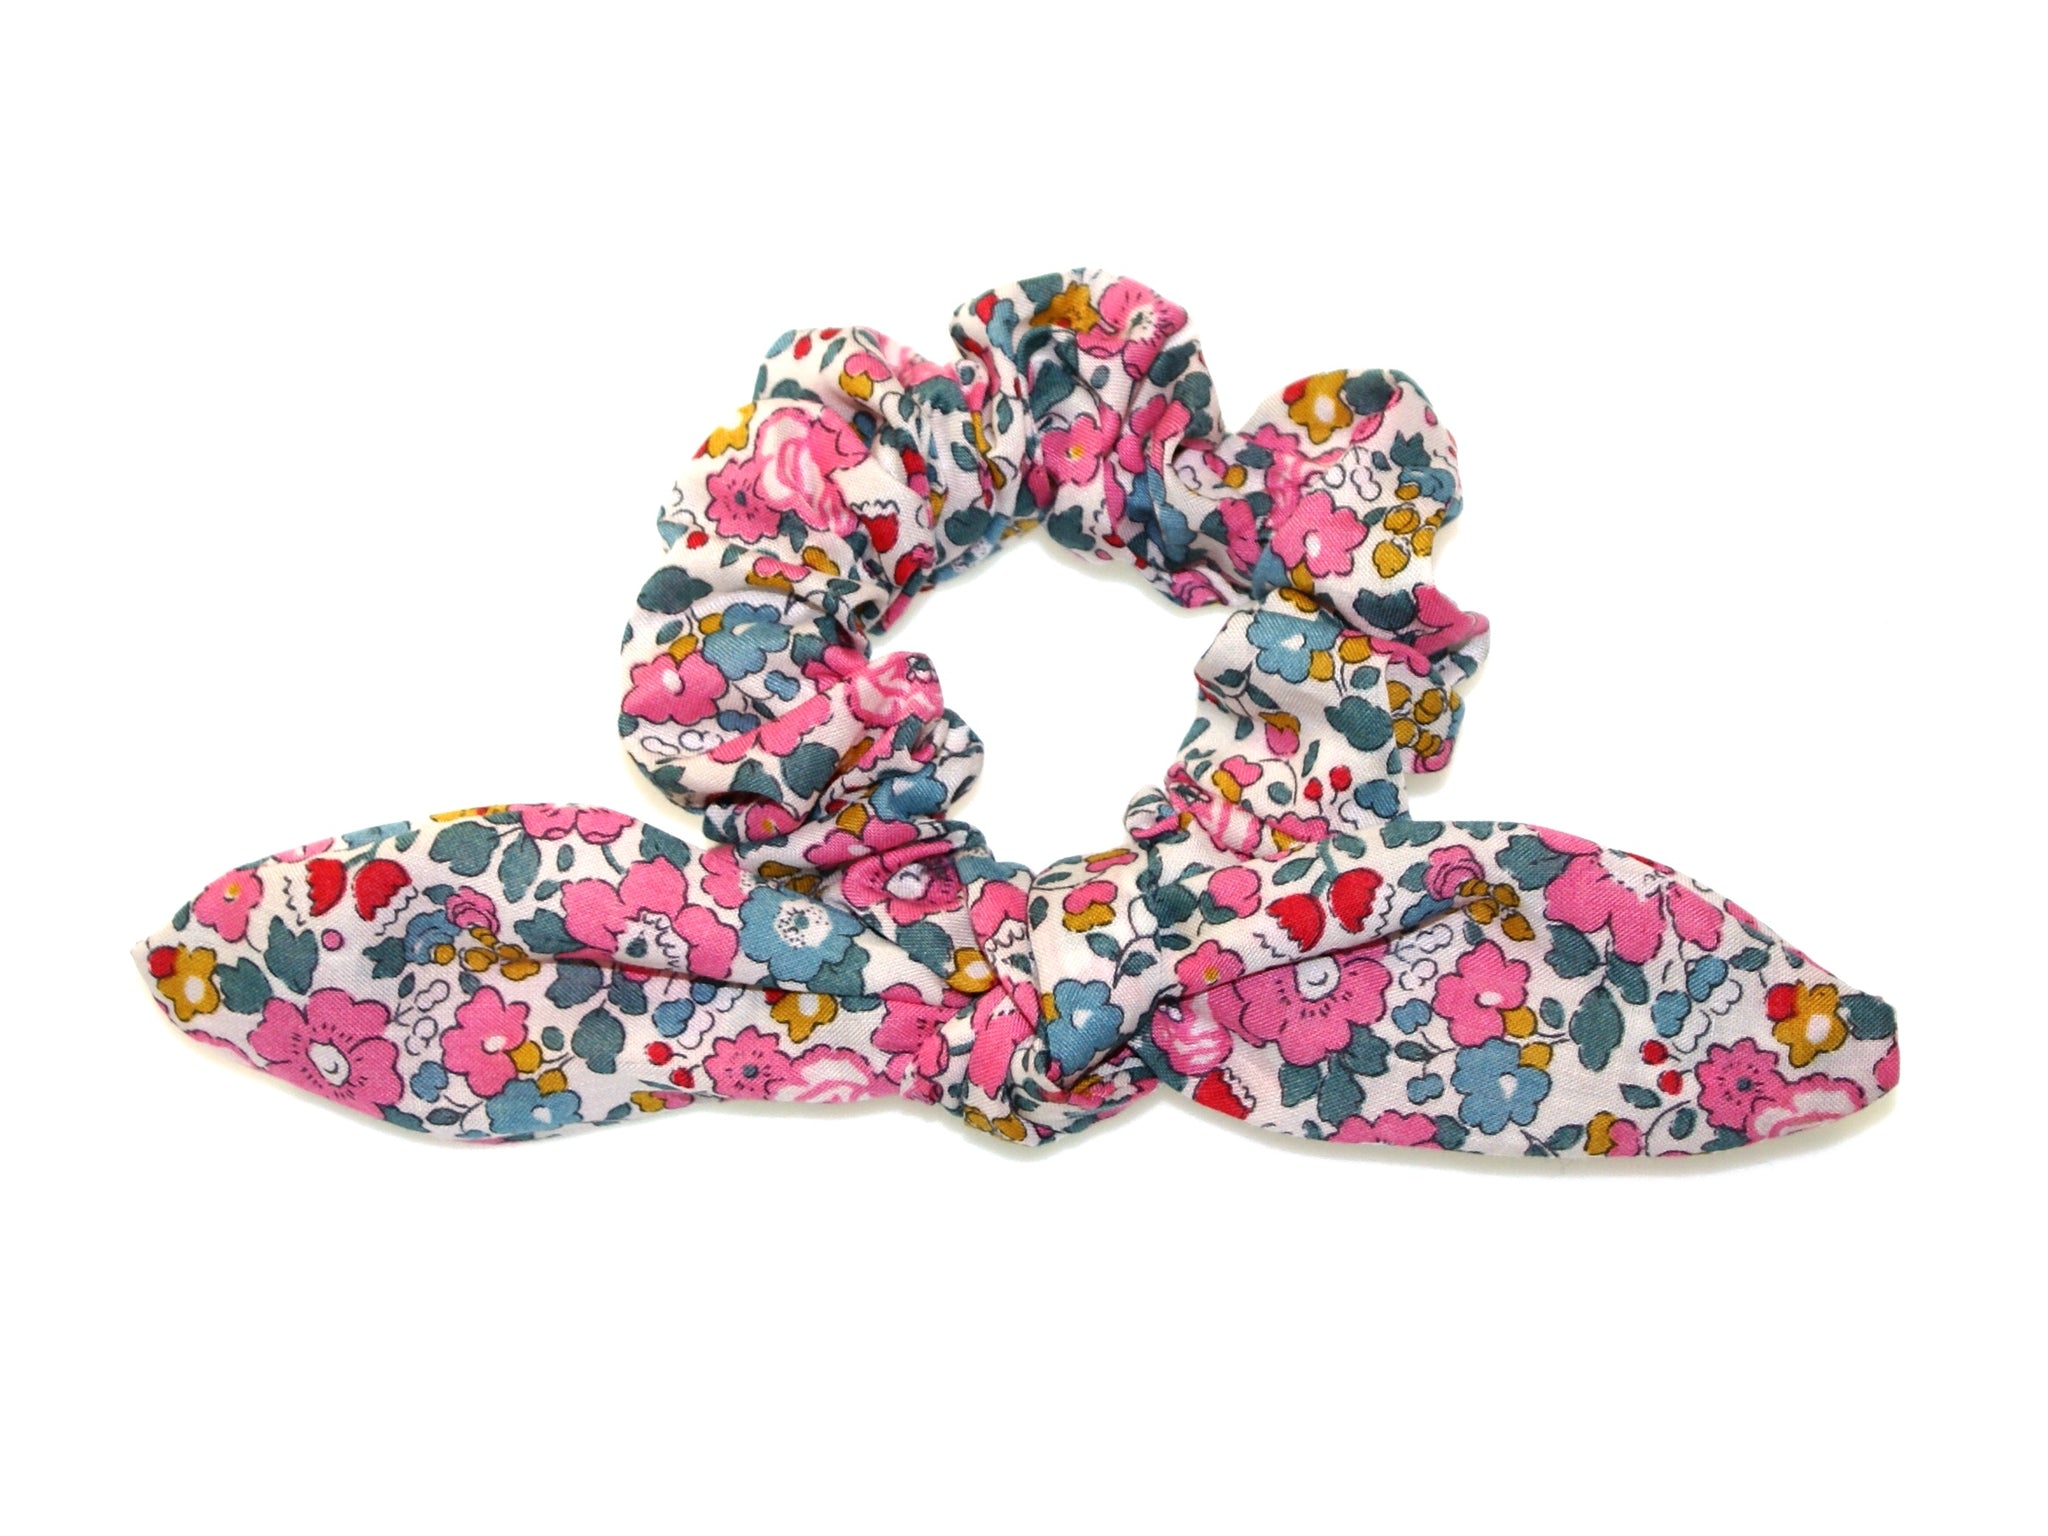 Liberty Betsy Ann Tie Bow Scrunchie - Pink/Teal